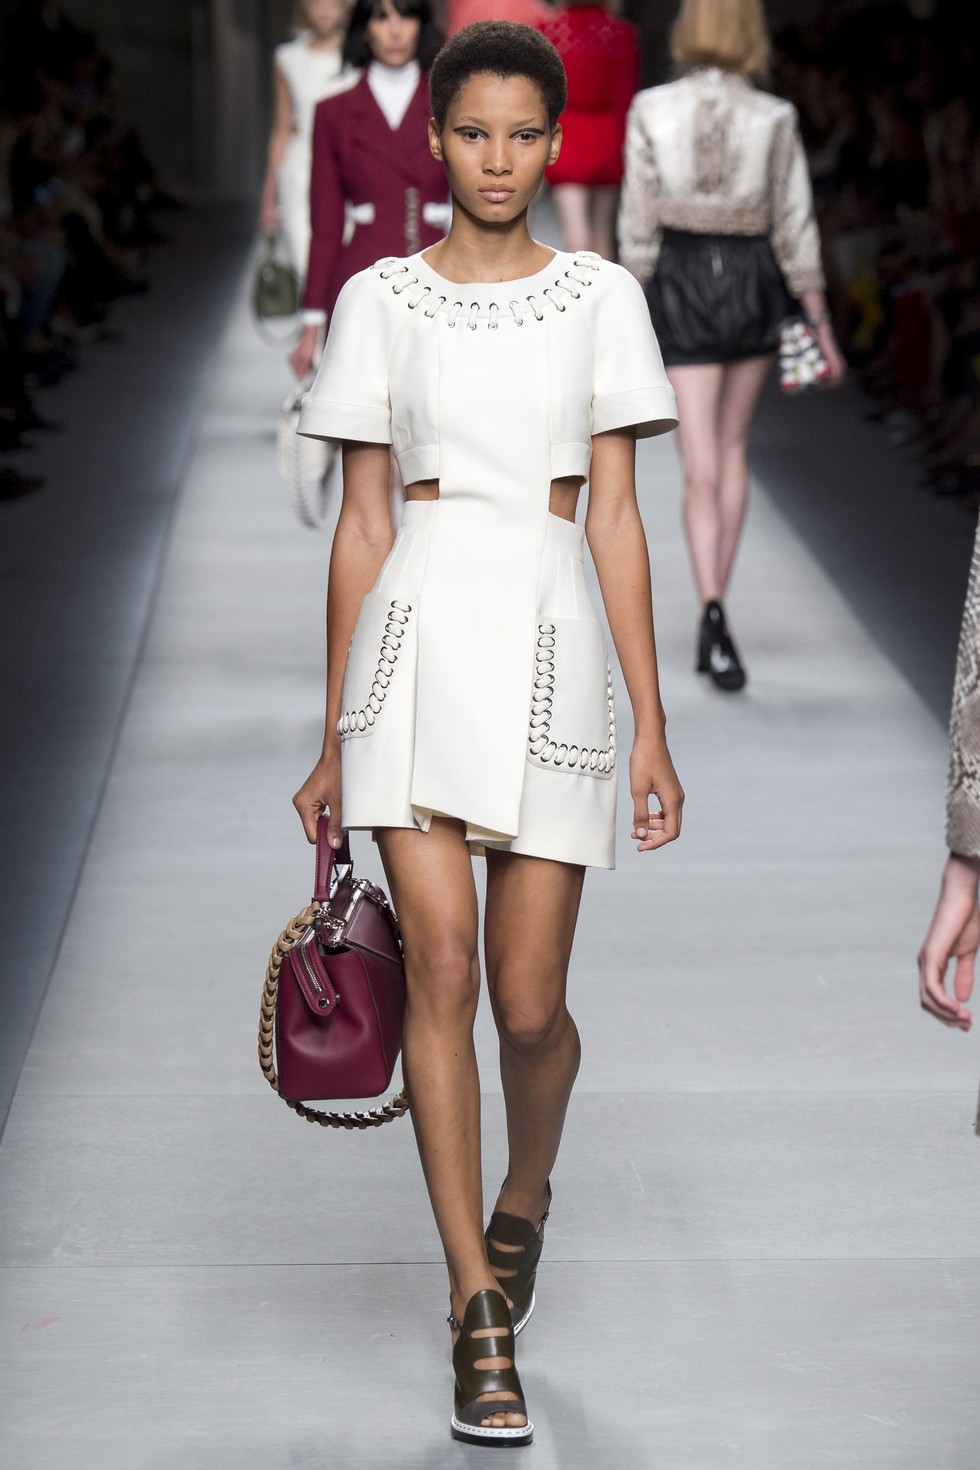 Milan Fashion Week 2016 Spring Summer News Day two best moments-Fendi